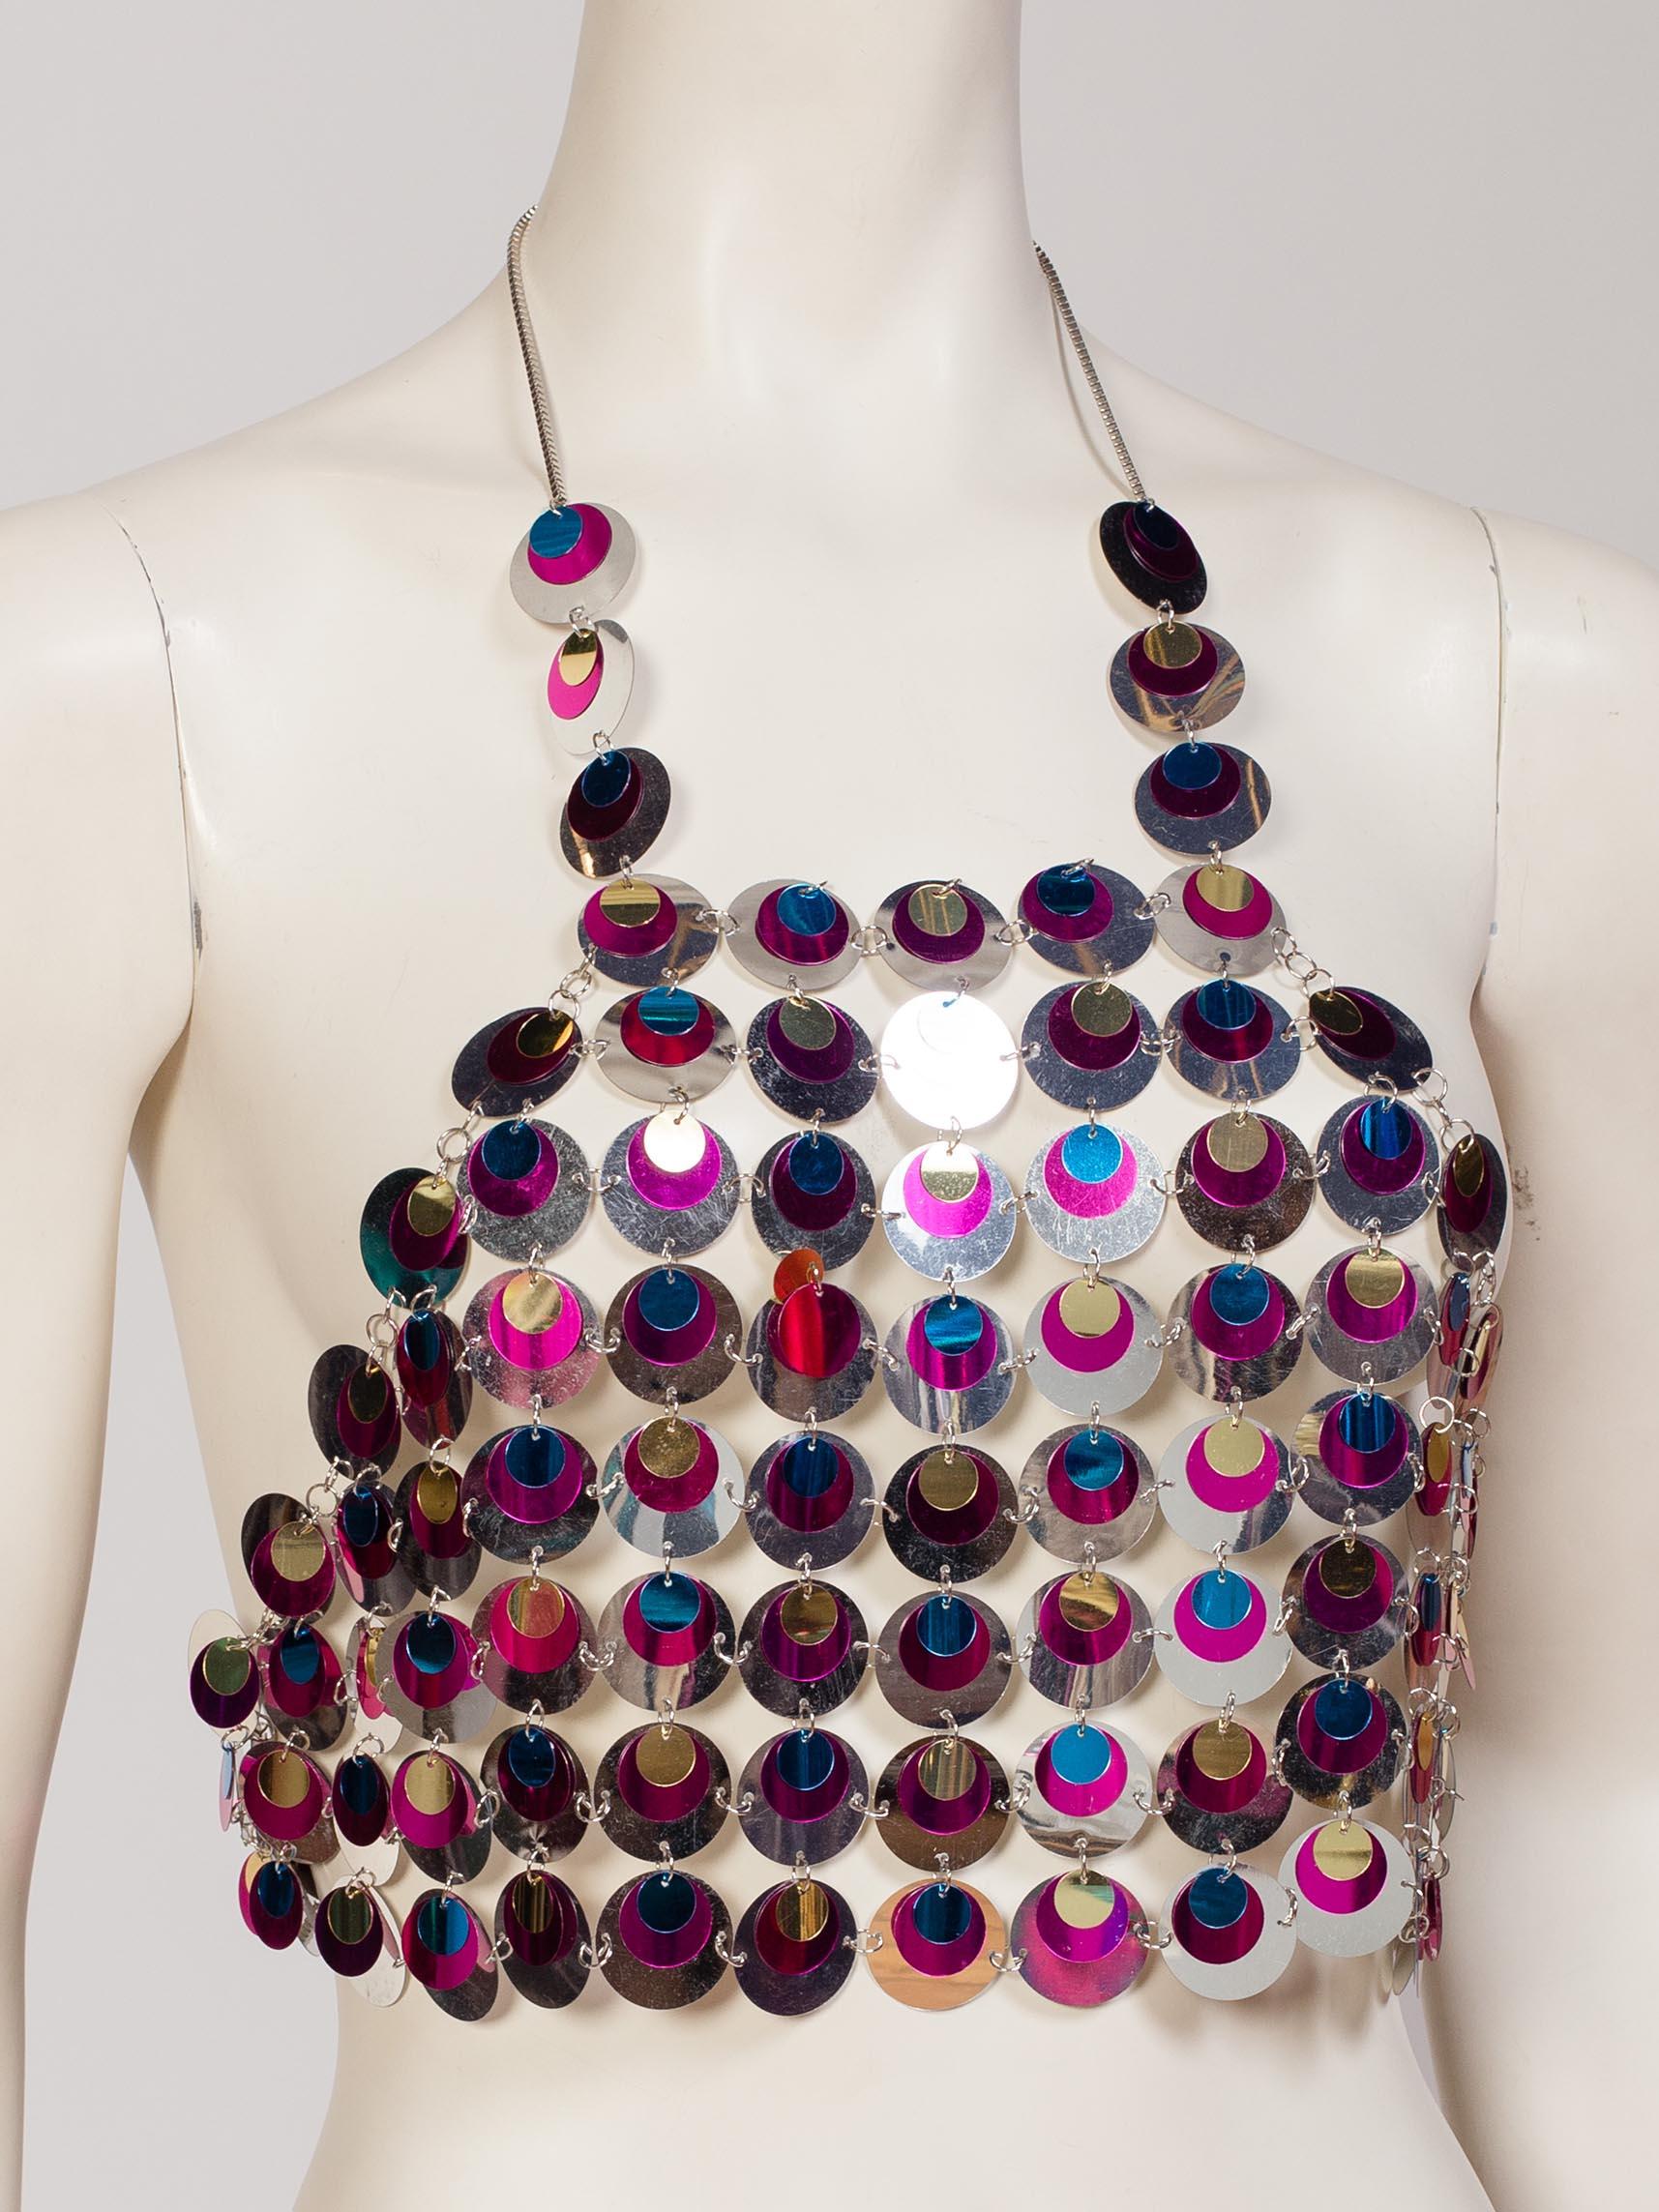 1960s Paco Rabanne Style Sequin Chainmail Top
